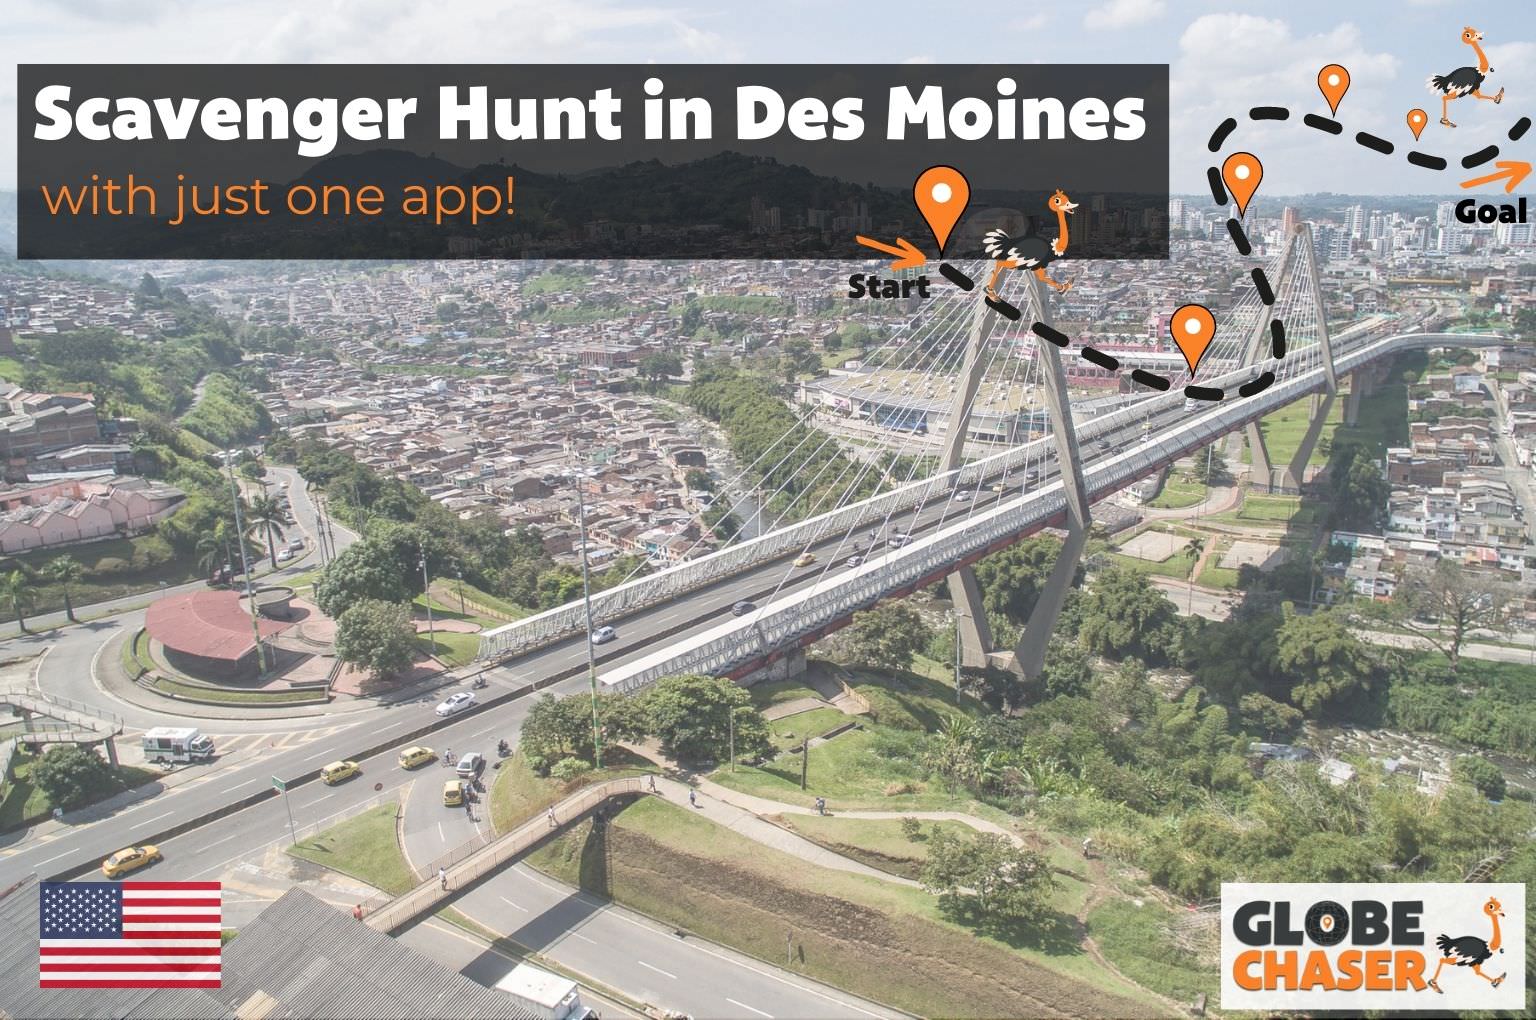 Scavenger Hunt in Des Moines, USA - Family Activities with the Globe Chaser App for Outdoor Fun